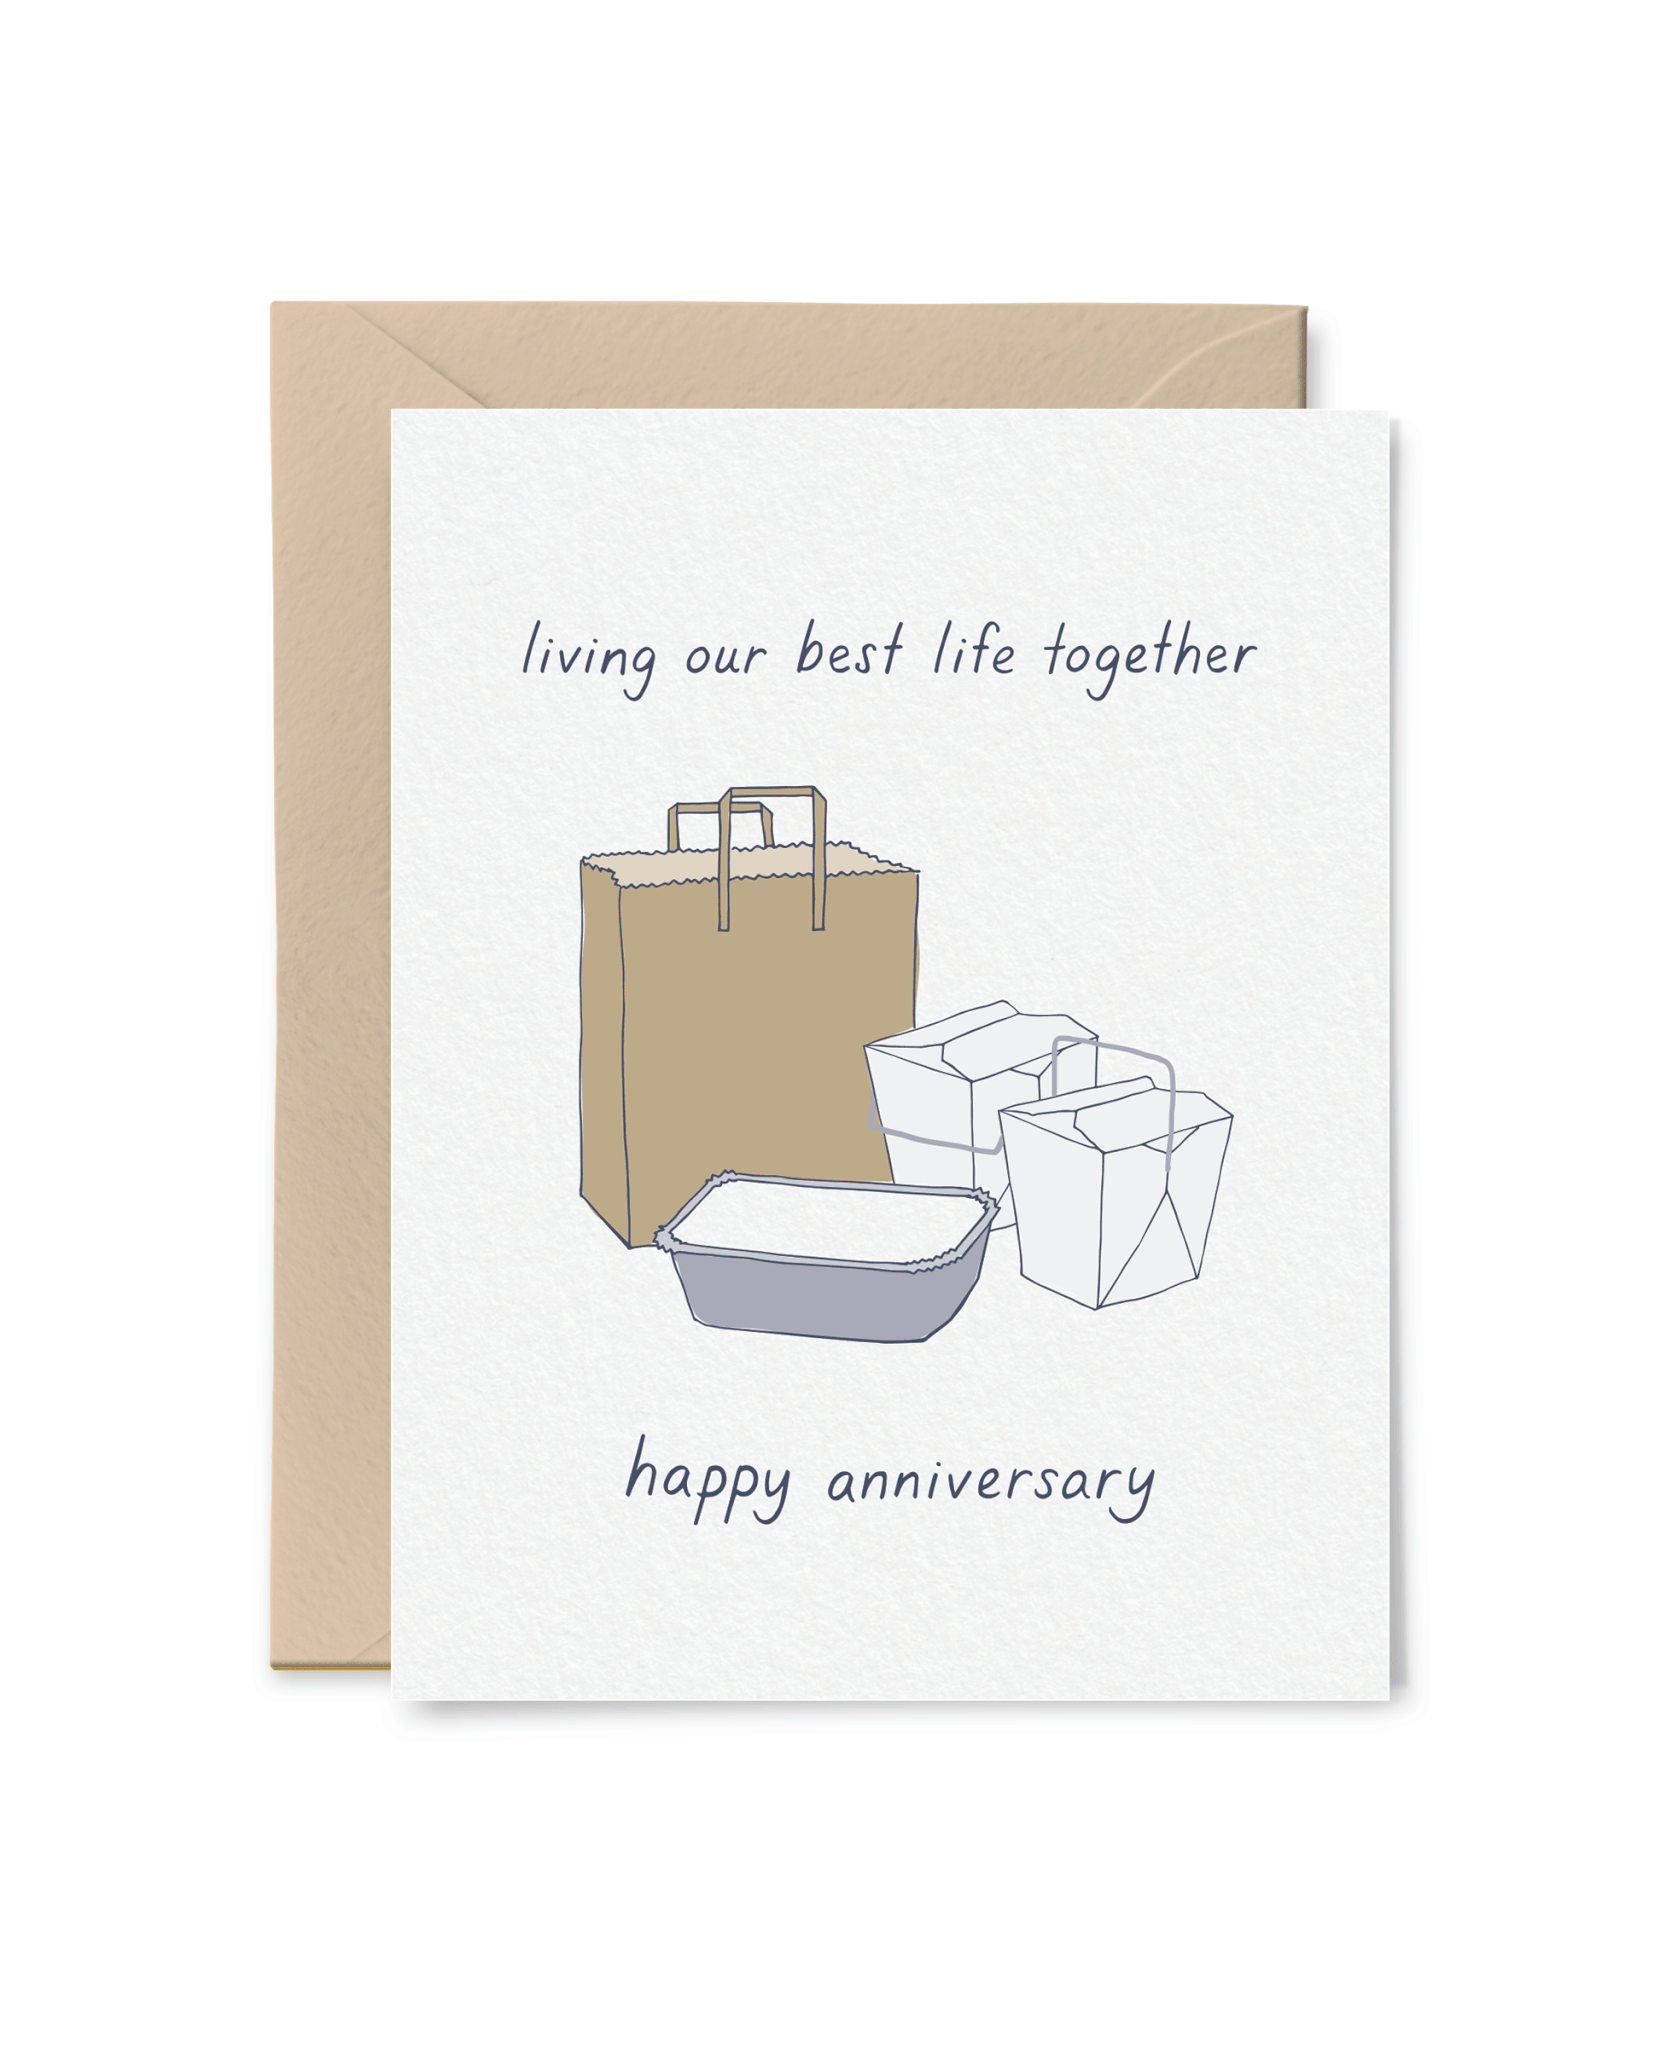 Tiny Hooray - TIH (formerly Little Goat, LG) Living Our Best Life Together Anniversary Card